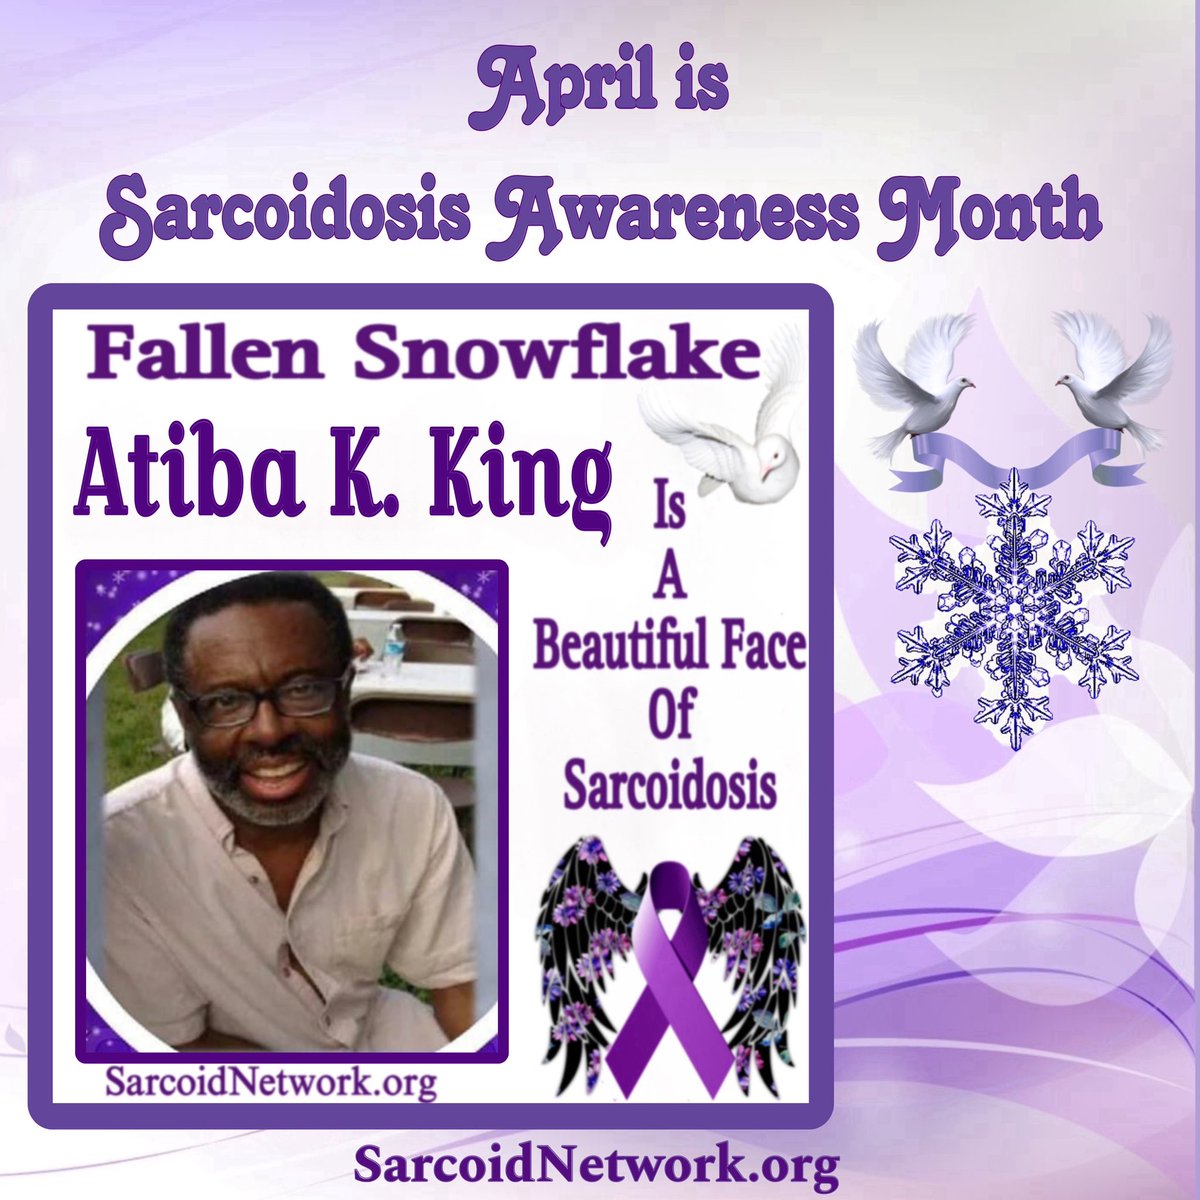 This is our Sarcoidosis Brother Fallen Snowflake Atiba K. King and he is a Beautiful Face of Sarcoidosis.💜 #Sarcoidosis #raredisease #preciousmemories #patientadvocate #sarcoidosisadvocate #beautifulfacesofsarcoidosis #sarcoidosisawarenessmonth